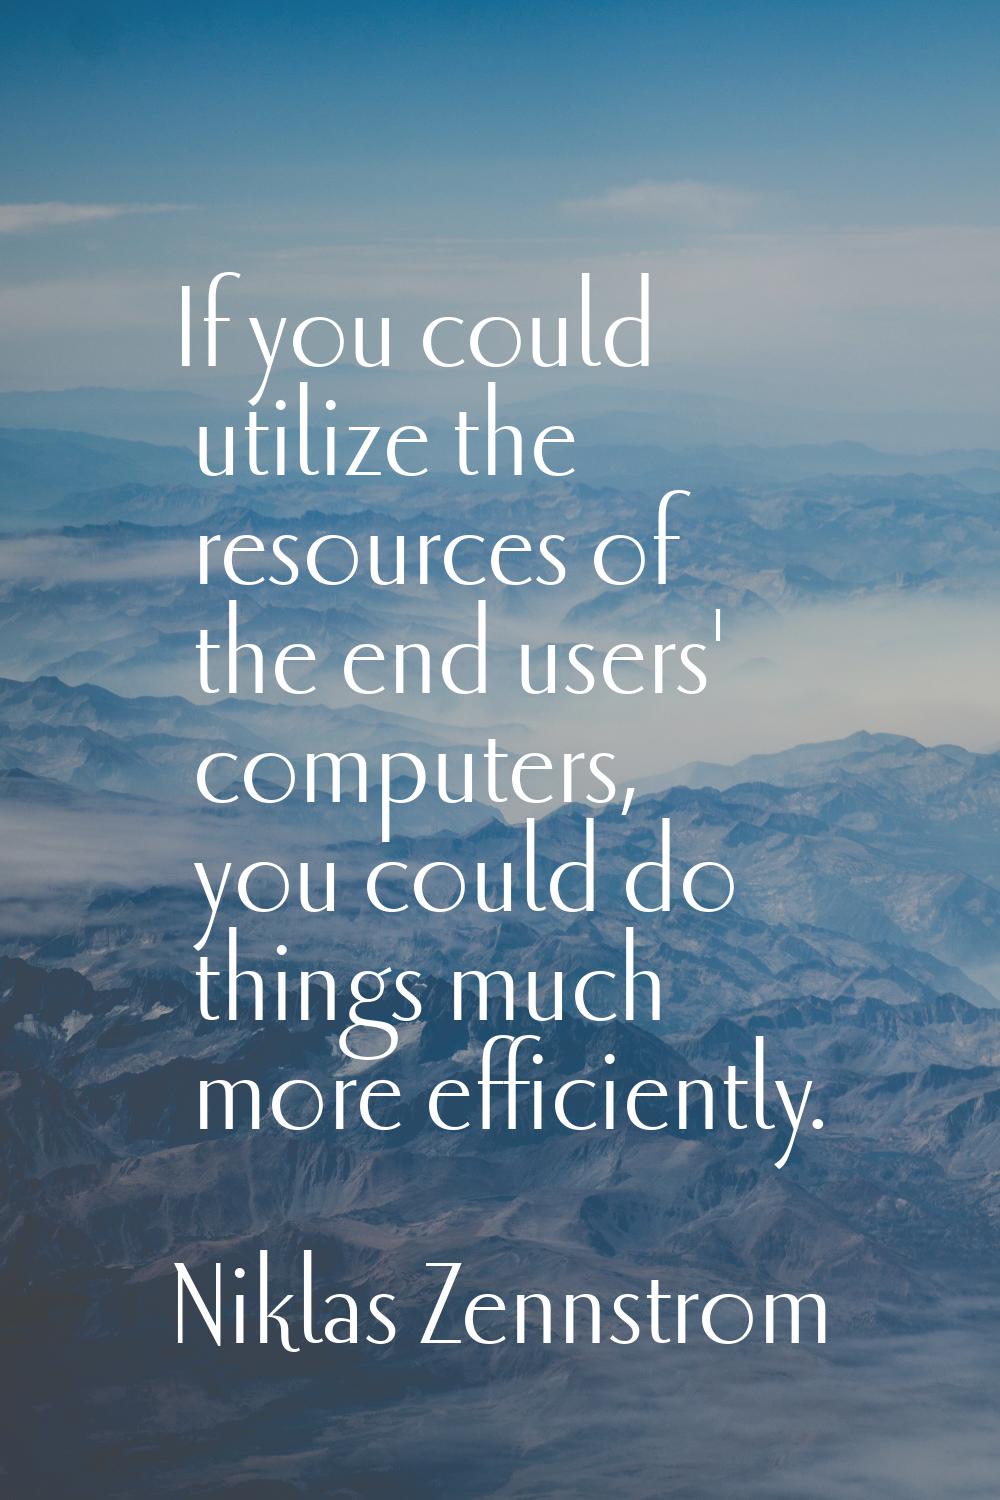 If you could utilize the resources of the end users' computers, you could do things much more effic